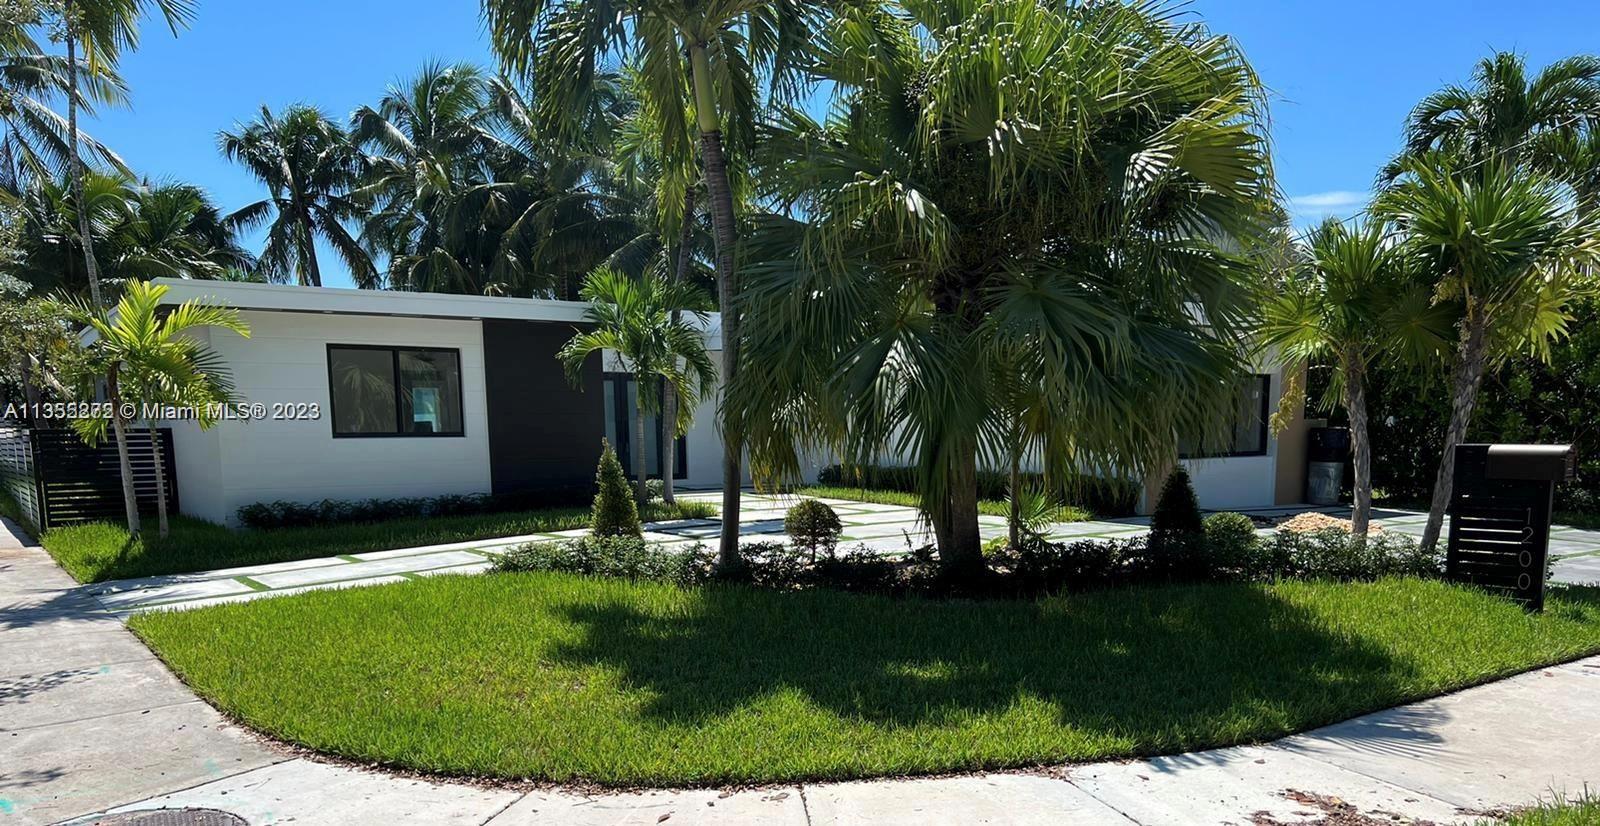 Waterfront home located in Miami Beach's hidden island of Biscayne Point with canal access to the Miami ocean. This hidden exclusive community is in very high demand and undergoing major changes. EVERYTHING IN THIS PROPERTY IS NEW! Completely renovated! 4 bedrooms 3 bathrooms, 2,665 Sq Ft living area, large open floor plan with new structural, electrical, plumbing, mechanical plans. New tile floors. New high ceilings, brand new impact windows & doors. Brand new modern driveway and approaches. New appliances and modern kitchen with granite counter tops. Perfect for families and entertaining with an excellent location close to beaches, Bal Harbor.